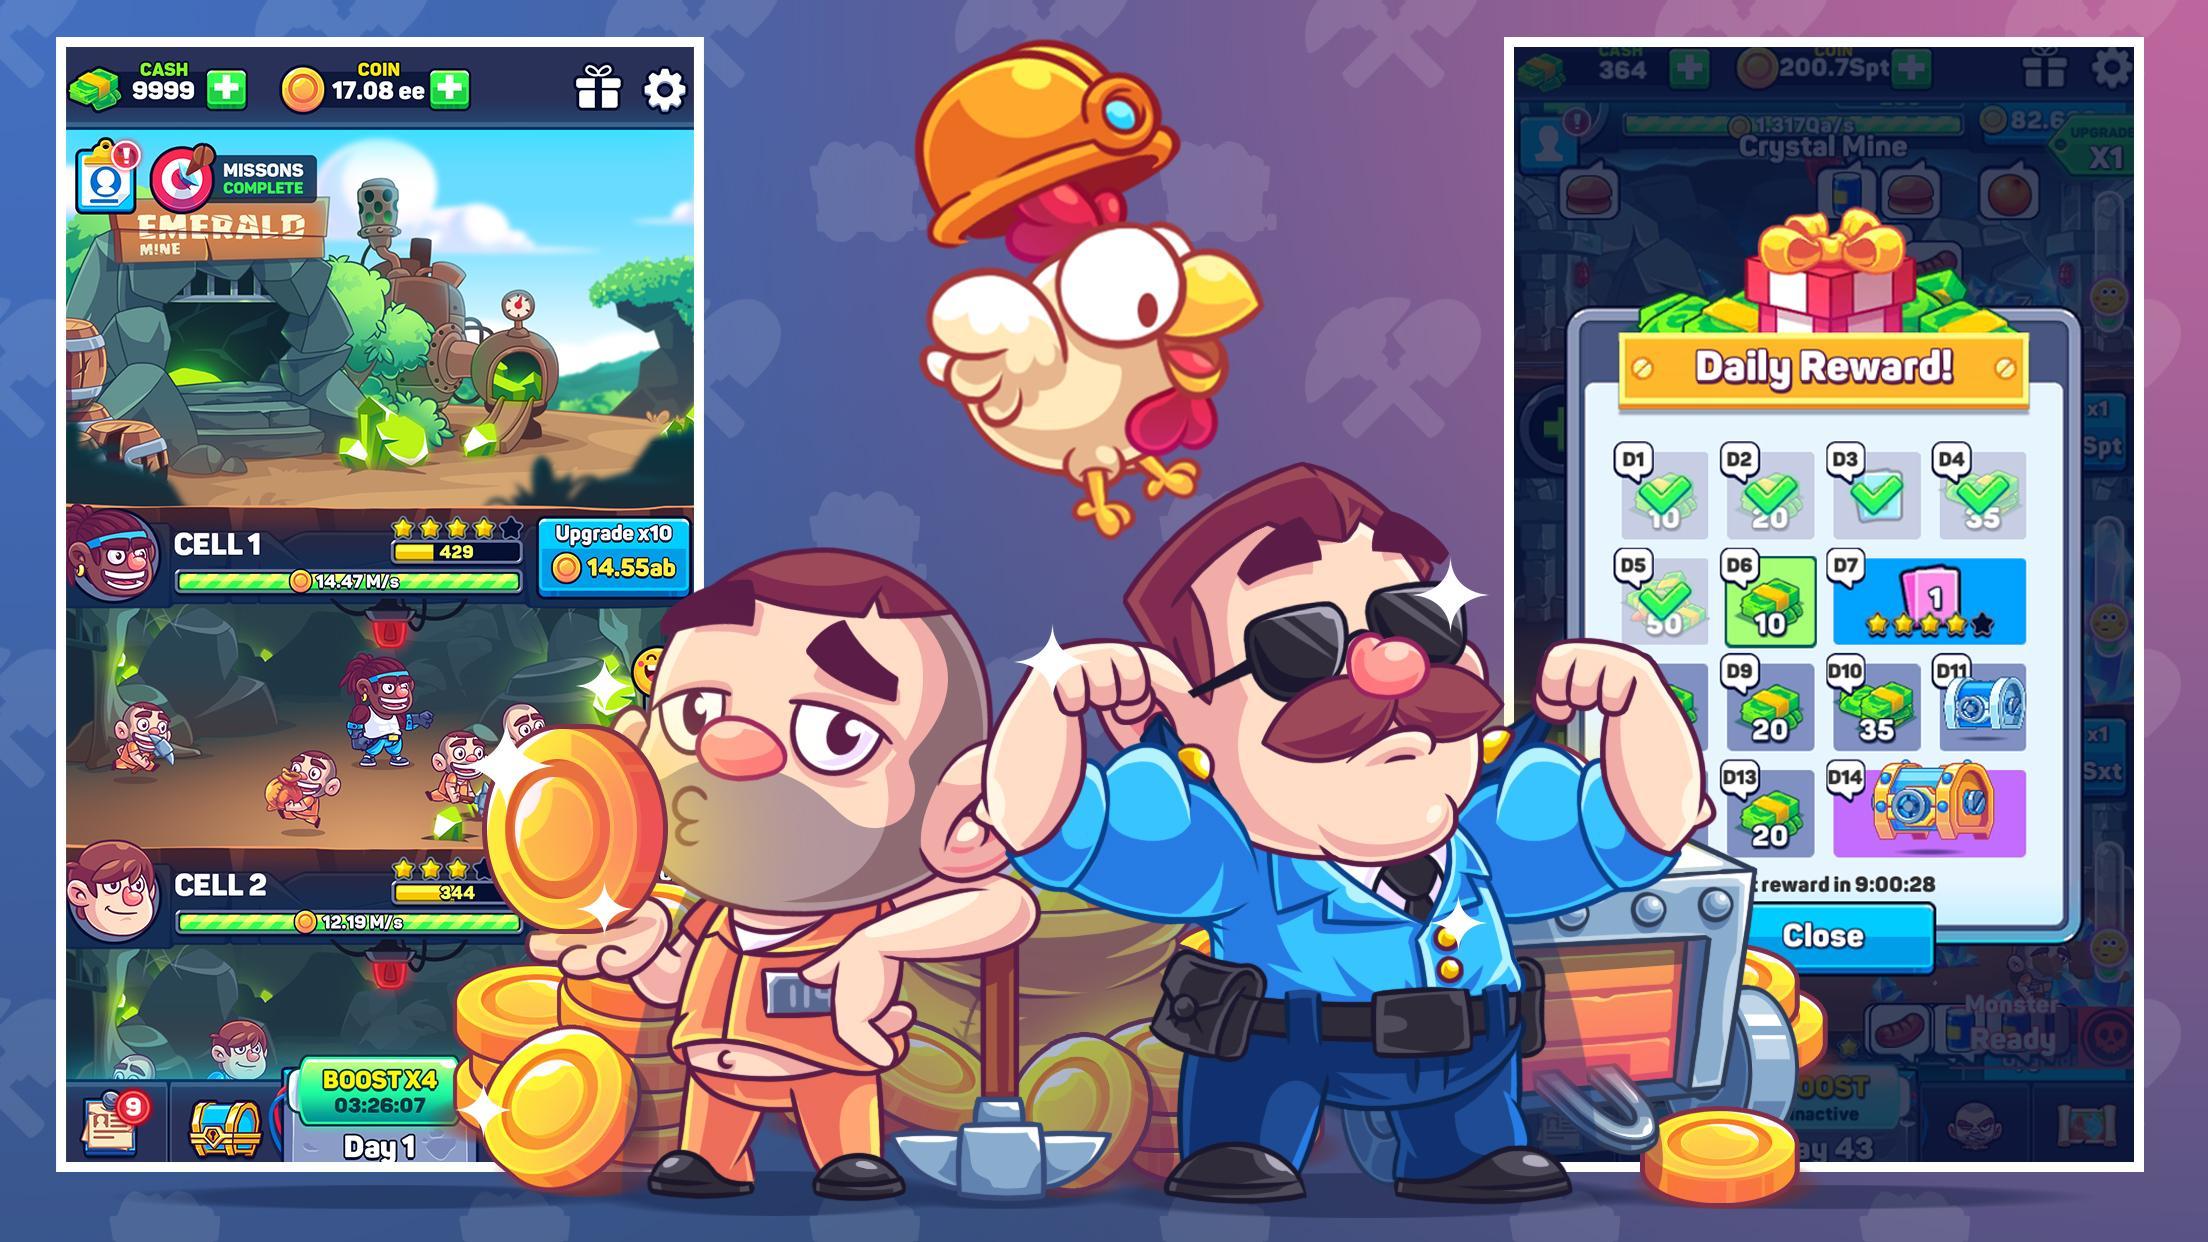 Idle Prison Tycoon: Gold Miner Clicker Gameのキャプチャ